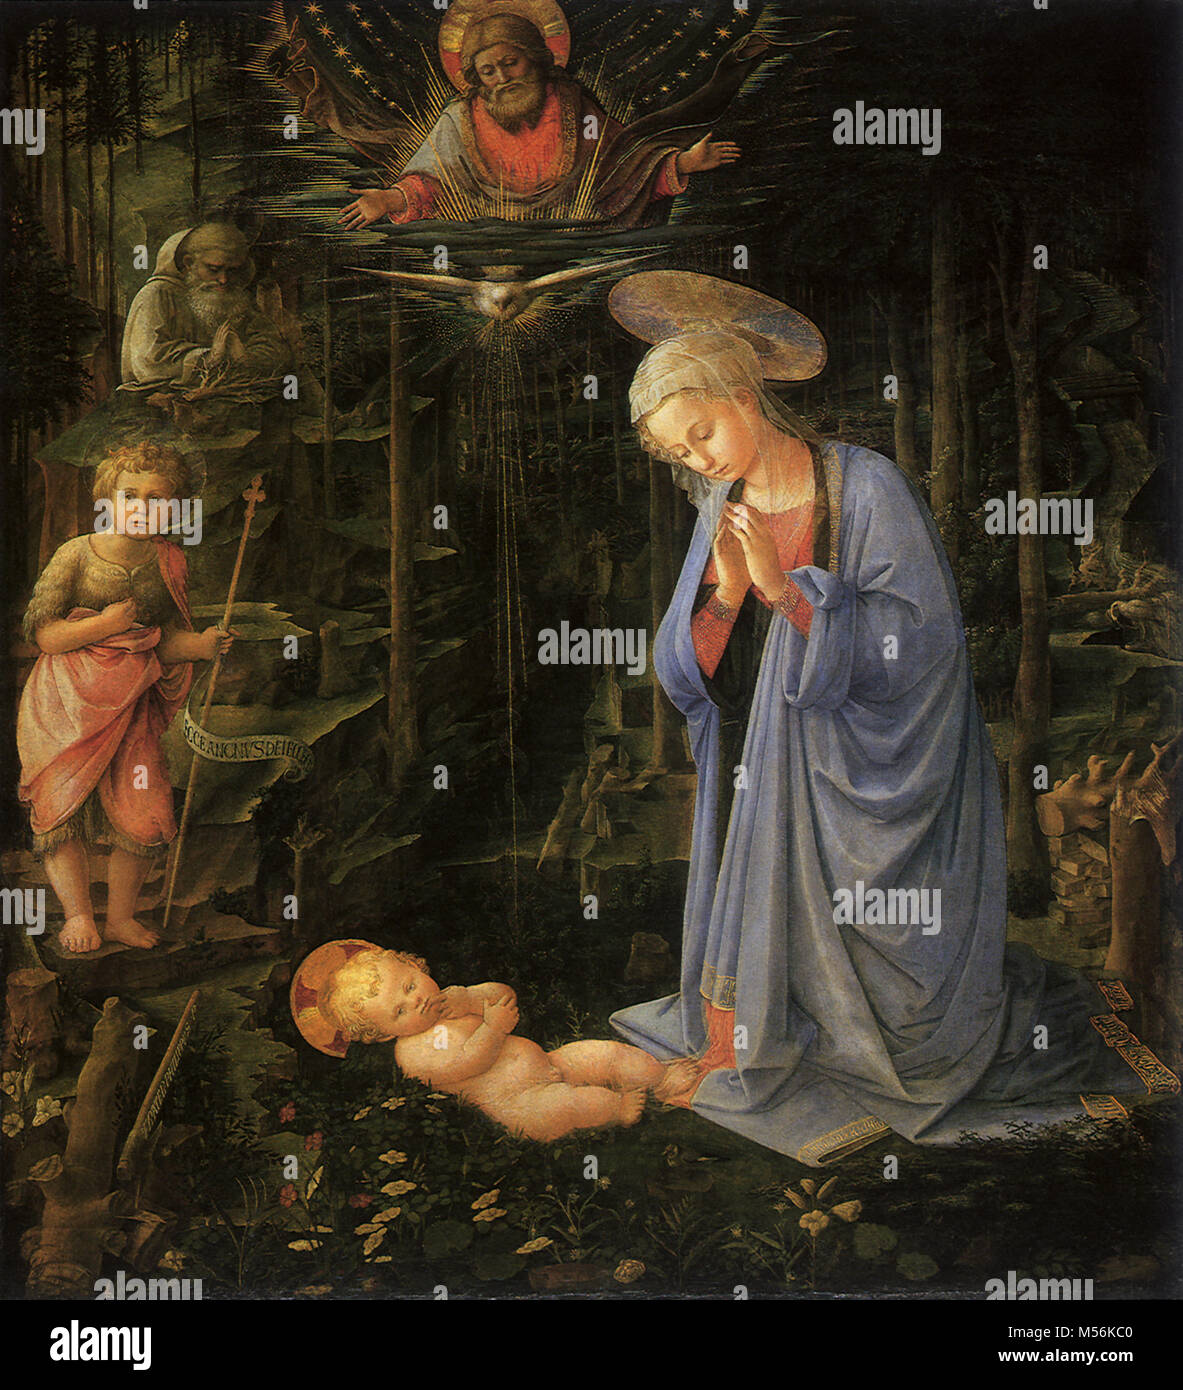 Adoration of the Child,The Stock Photo